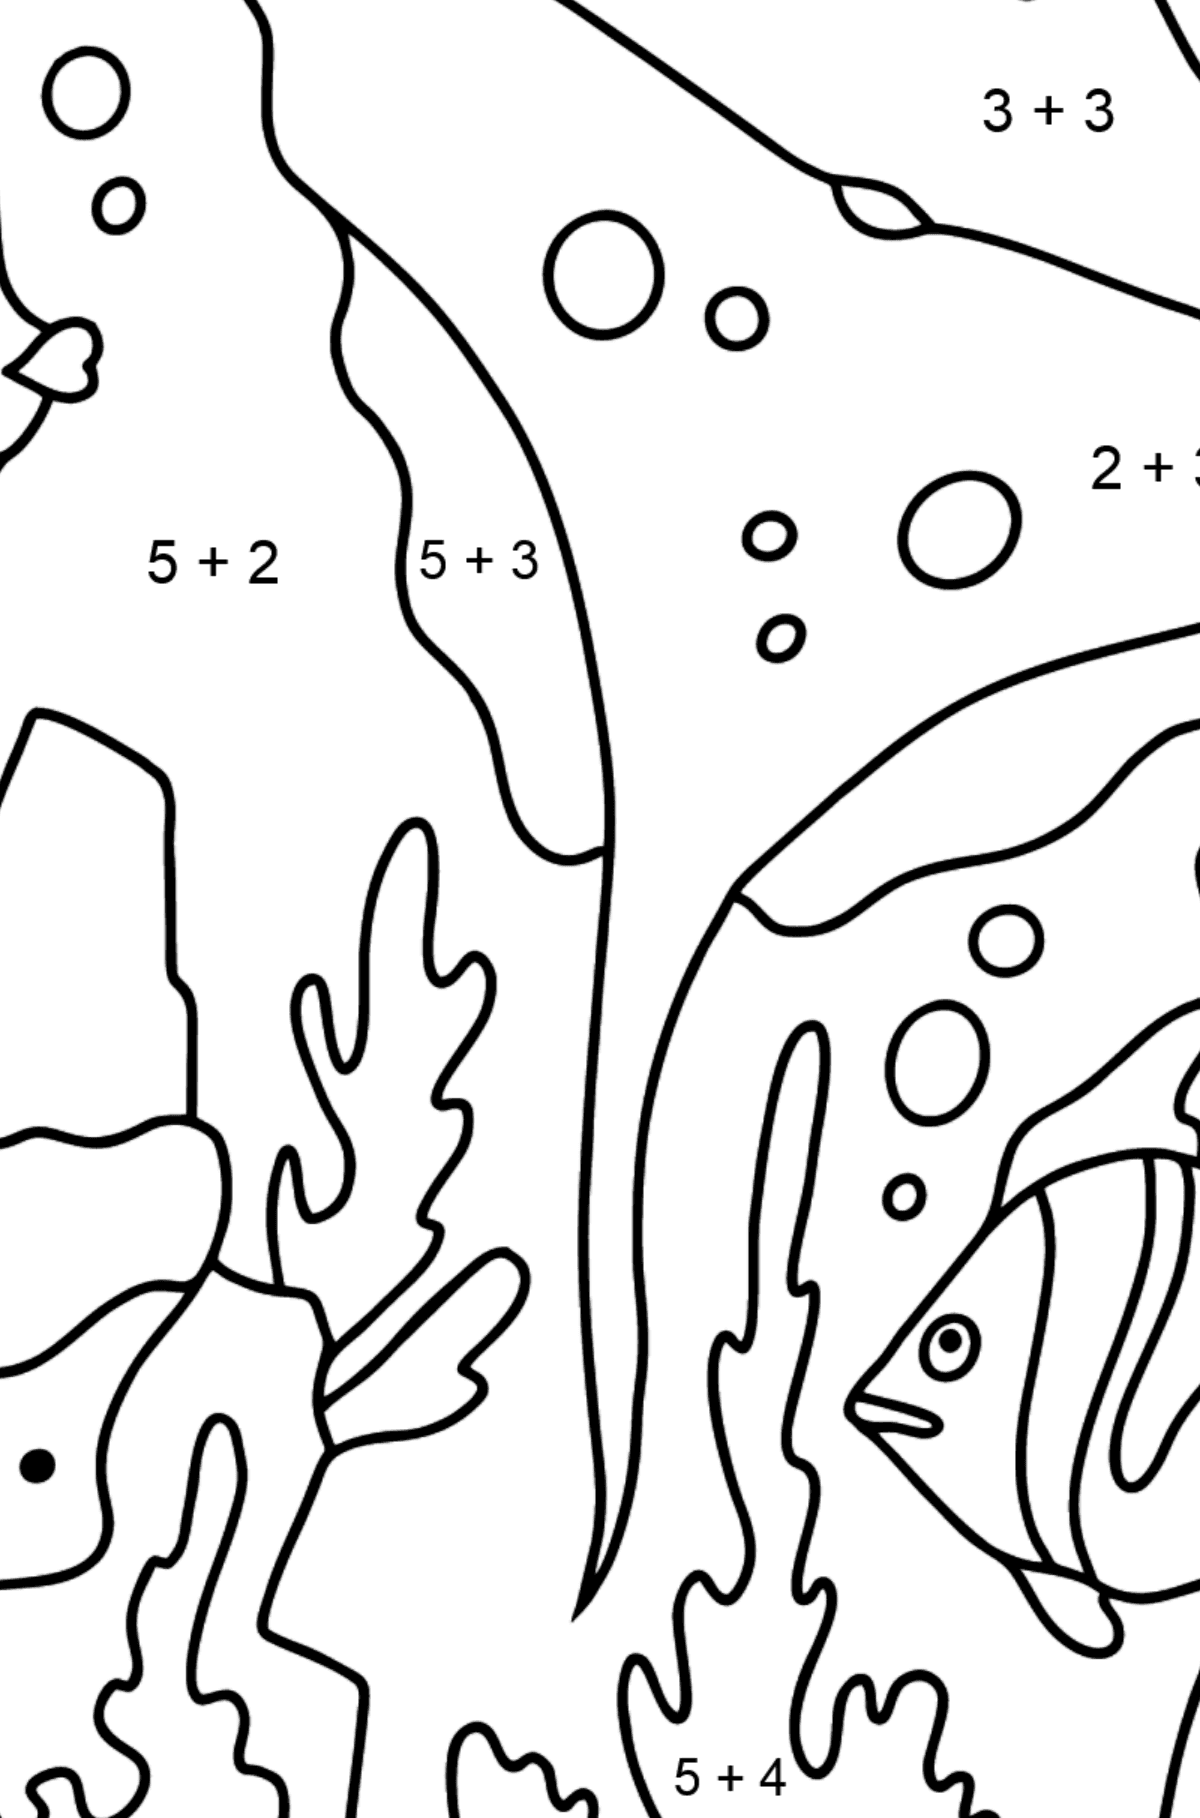 Coloring Page - Fish are Playing with a Charming Stingray - Math Coloring - Addition for Kids